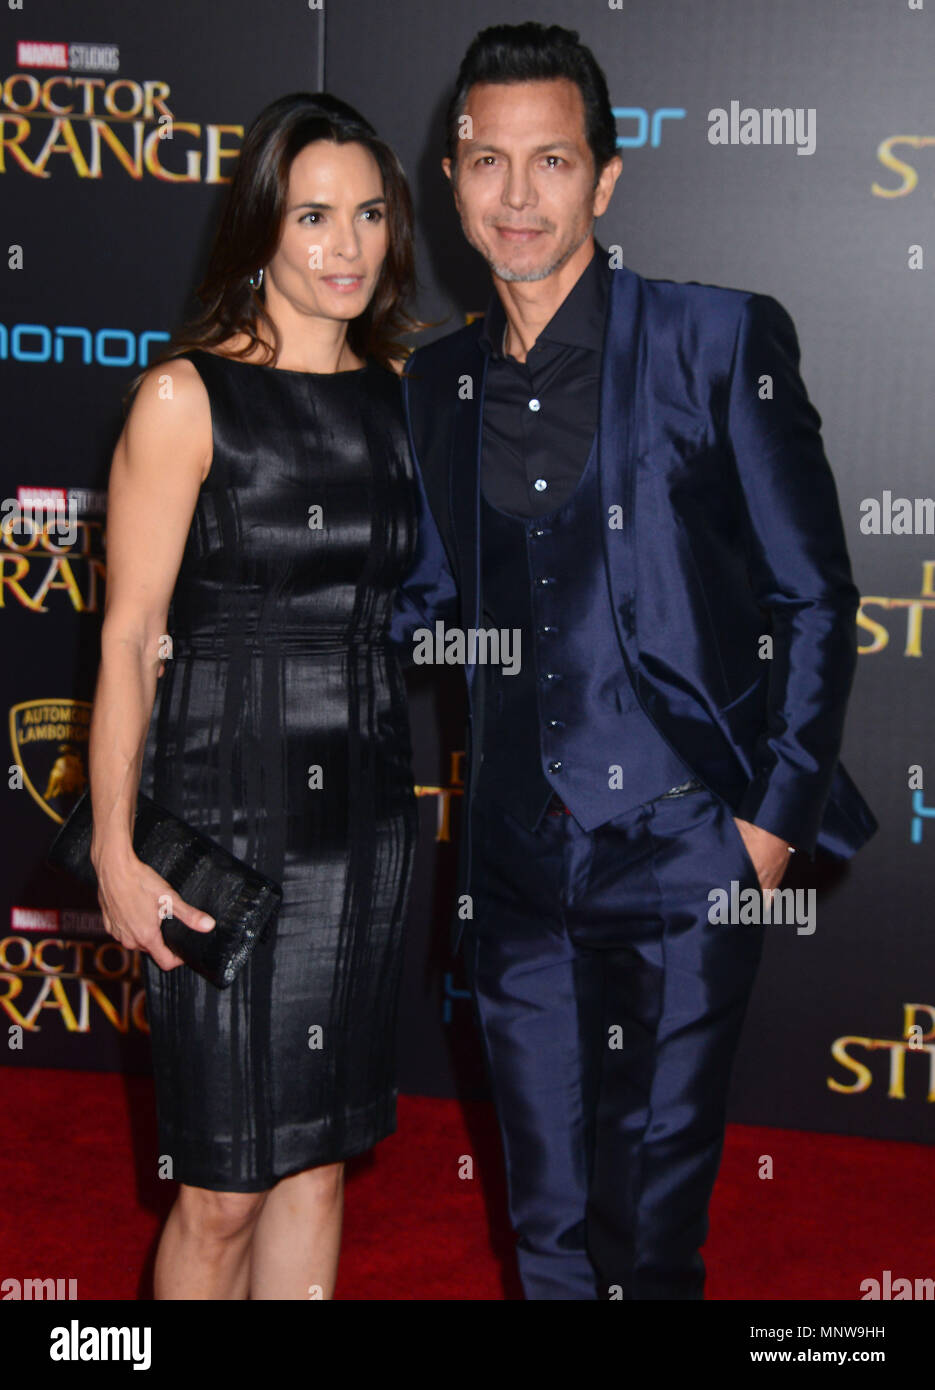 Benjamin Bratt, Talisa Soto 046 at the Doctor Strange premiere at the El Capitan and TCL Chinese Theatre in Los Angeles. October 20, 2016.Benjamin Bratt, Talisa Soto 046 ------------- Red Carpet Event, Vertical, USA, Film Industry, Celebrities,  Photography, Bestof, Arts Culture and Entertainment, Topix Celebrities fashion /  Vertical, Best of, Event in Hollywood Life - California,  Red Carpet and backstage, USA, Film Industry, Celebrities,  movie celebrities, TV celebrities, Music celebrities, Photography, Bestof, Arts Culture and Entertainment,  Topix, vertical,  family from from the year ,  Stock Photo